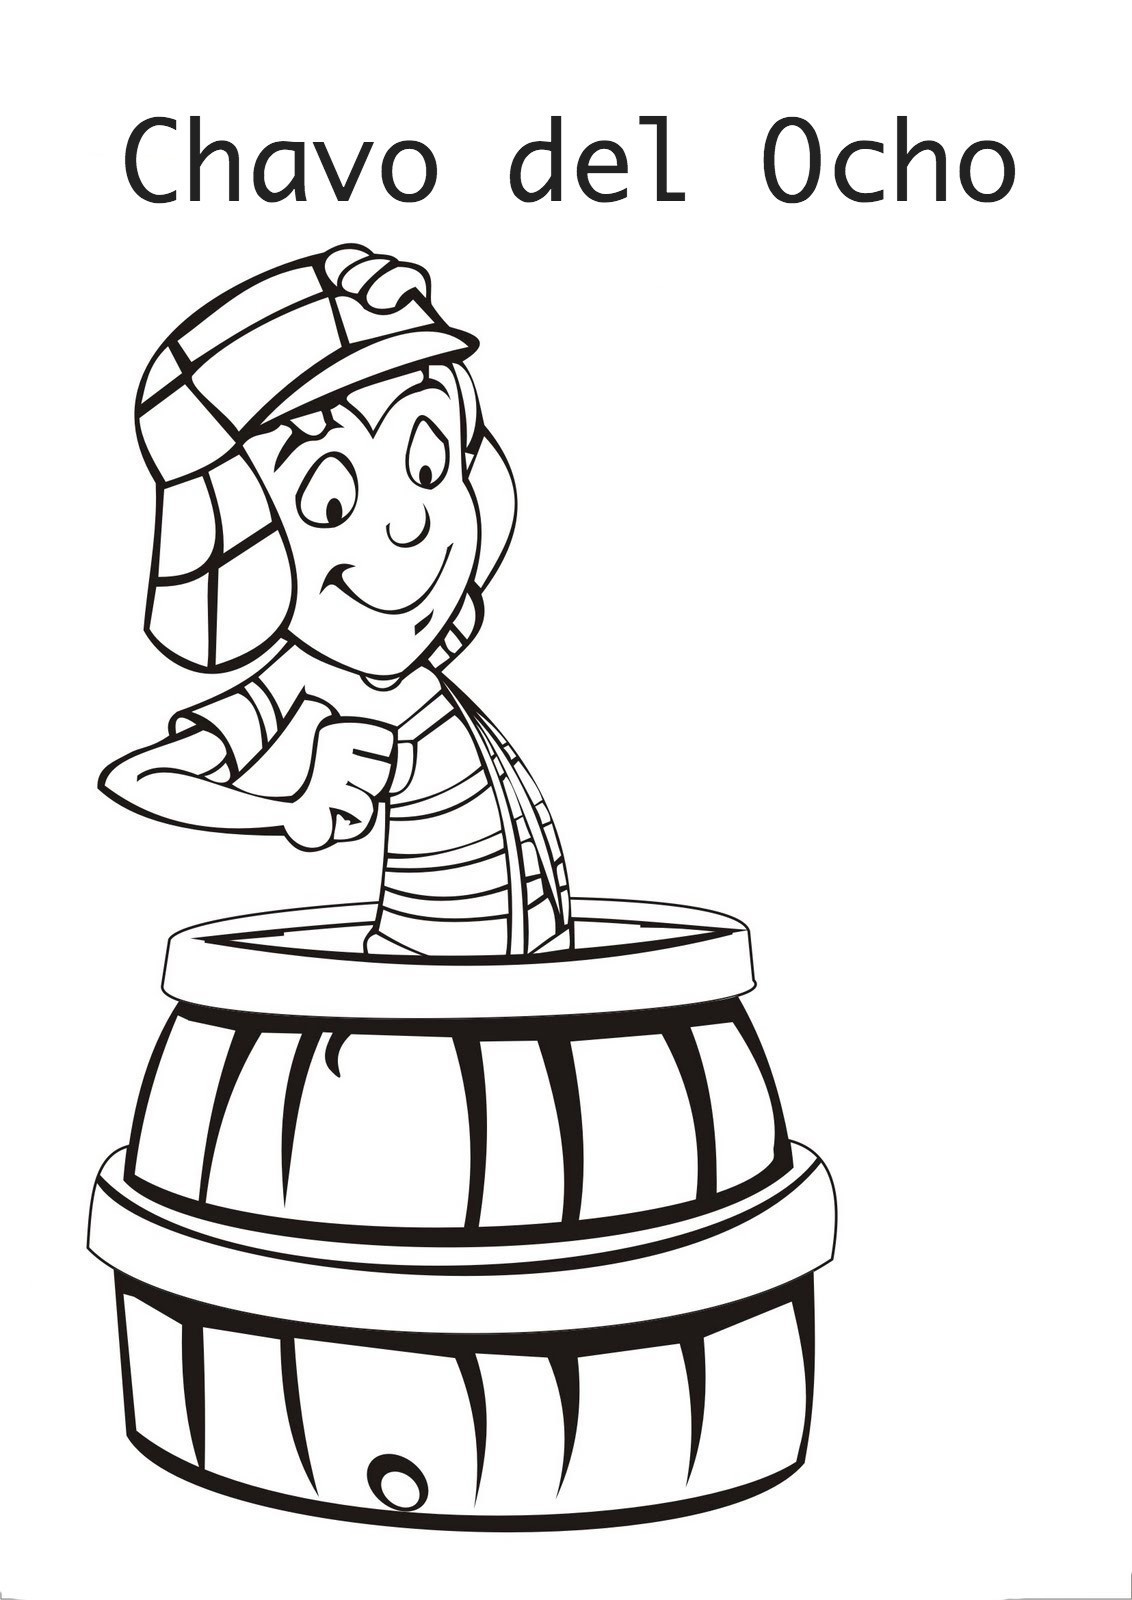 Chavo del ocho coloring pages | Coloring pages chavo | Coloring Pages